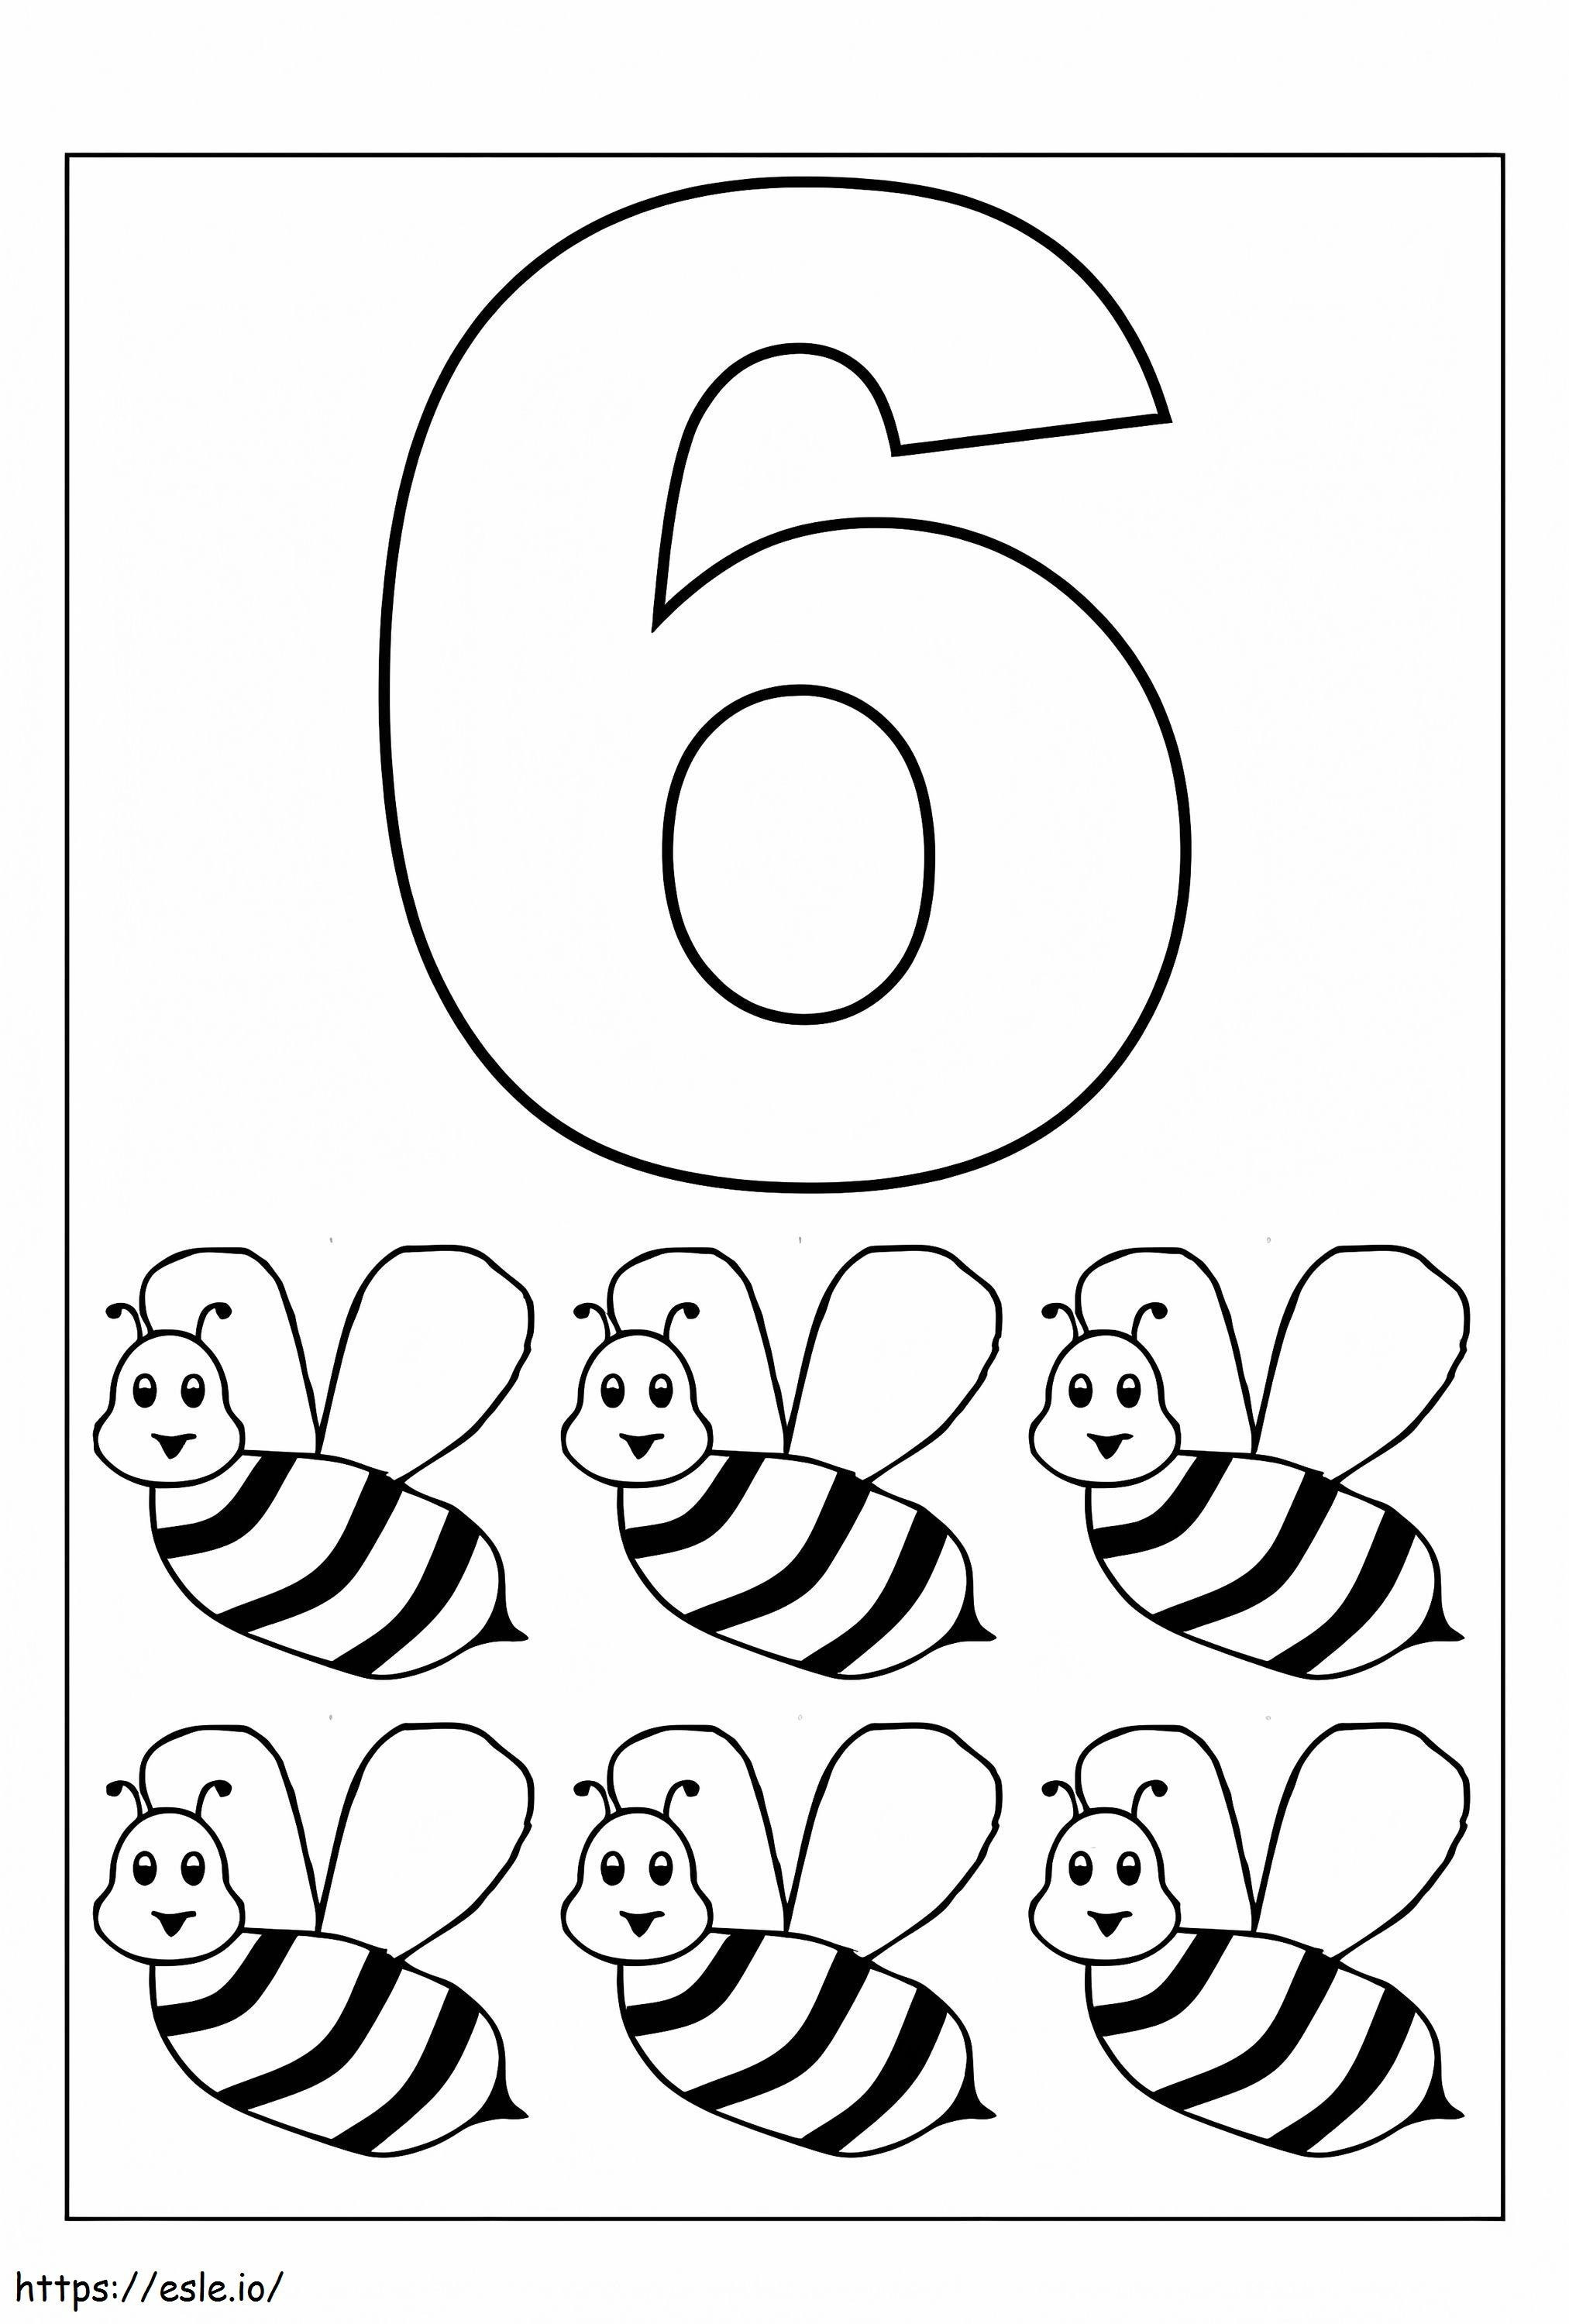 Number Six And Six One coloring page